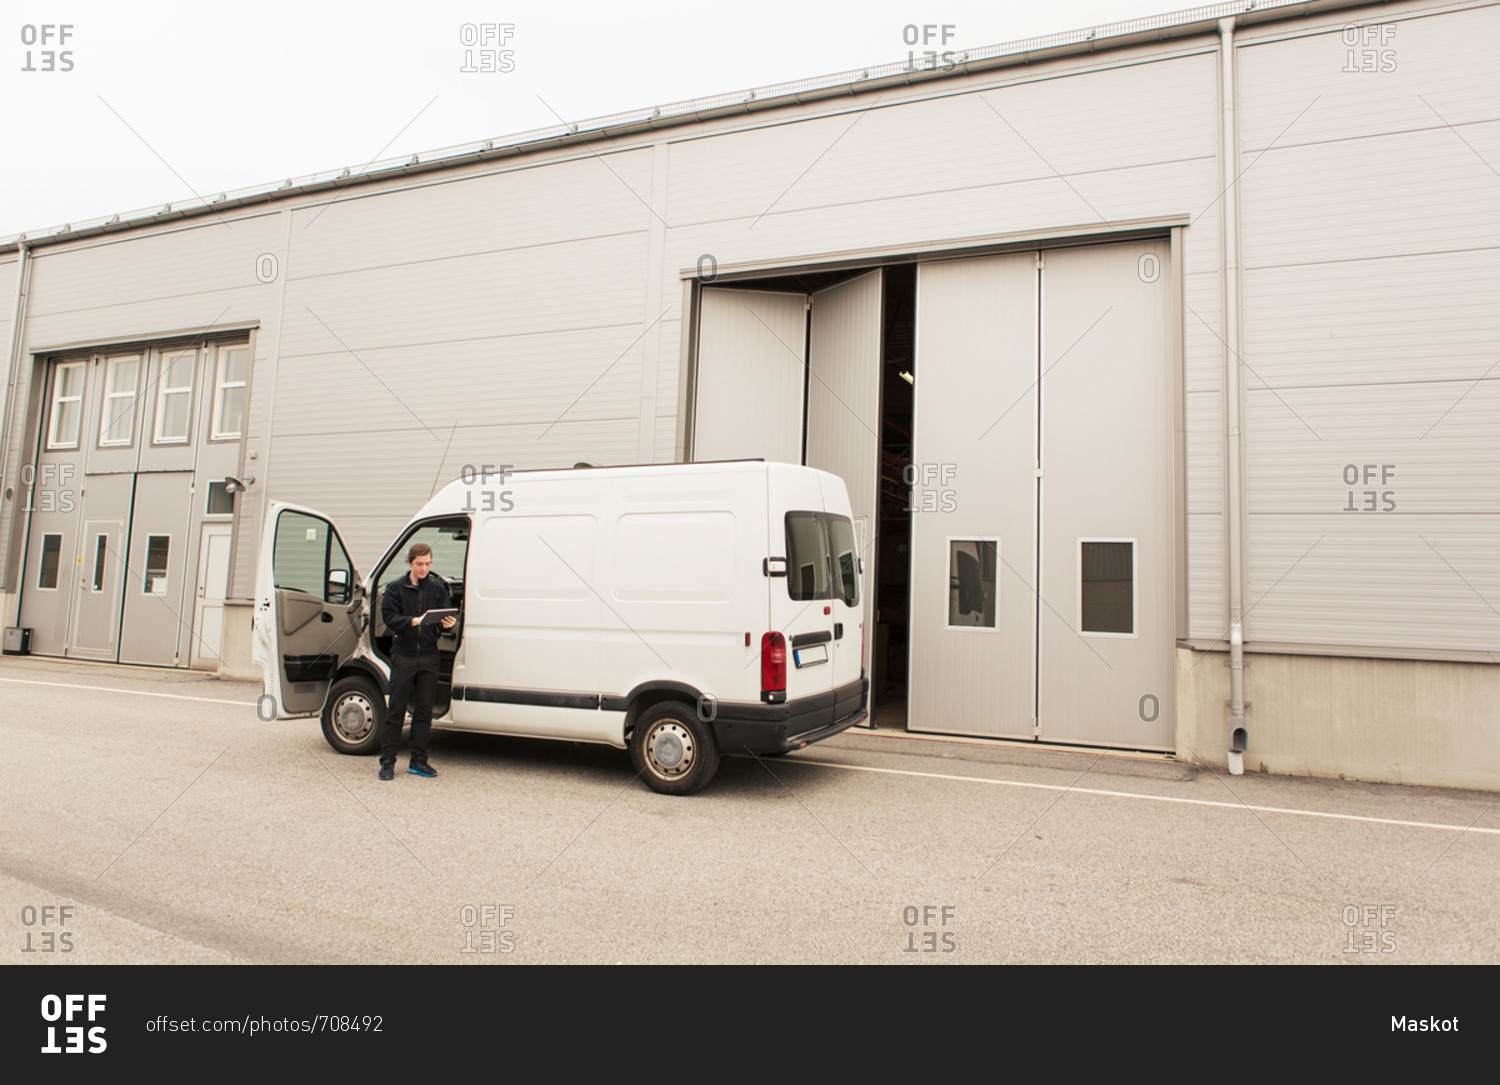 Manual worker standing by delivery van on road by industry